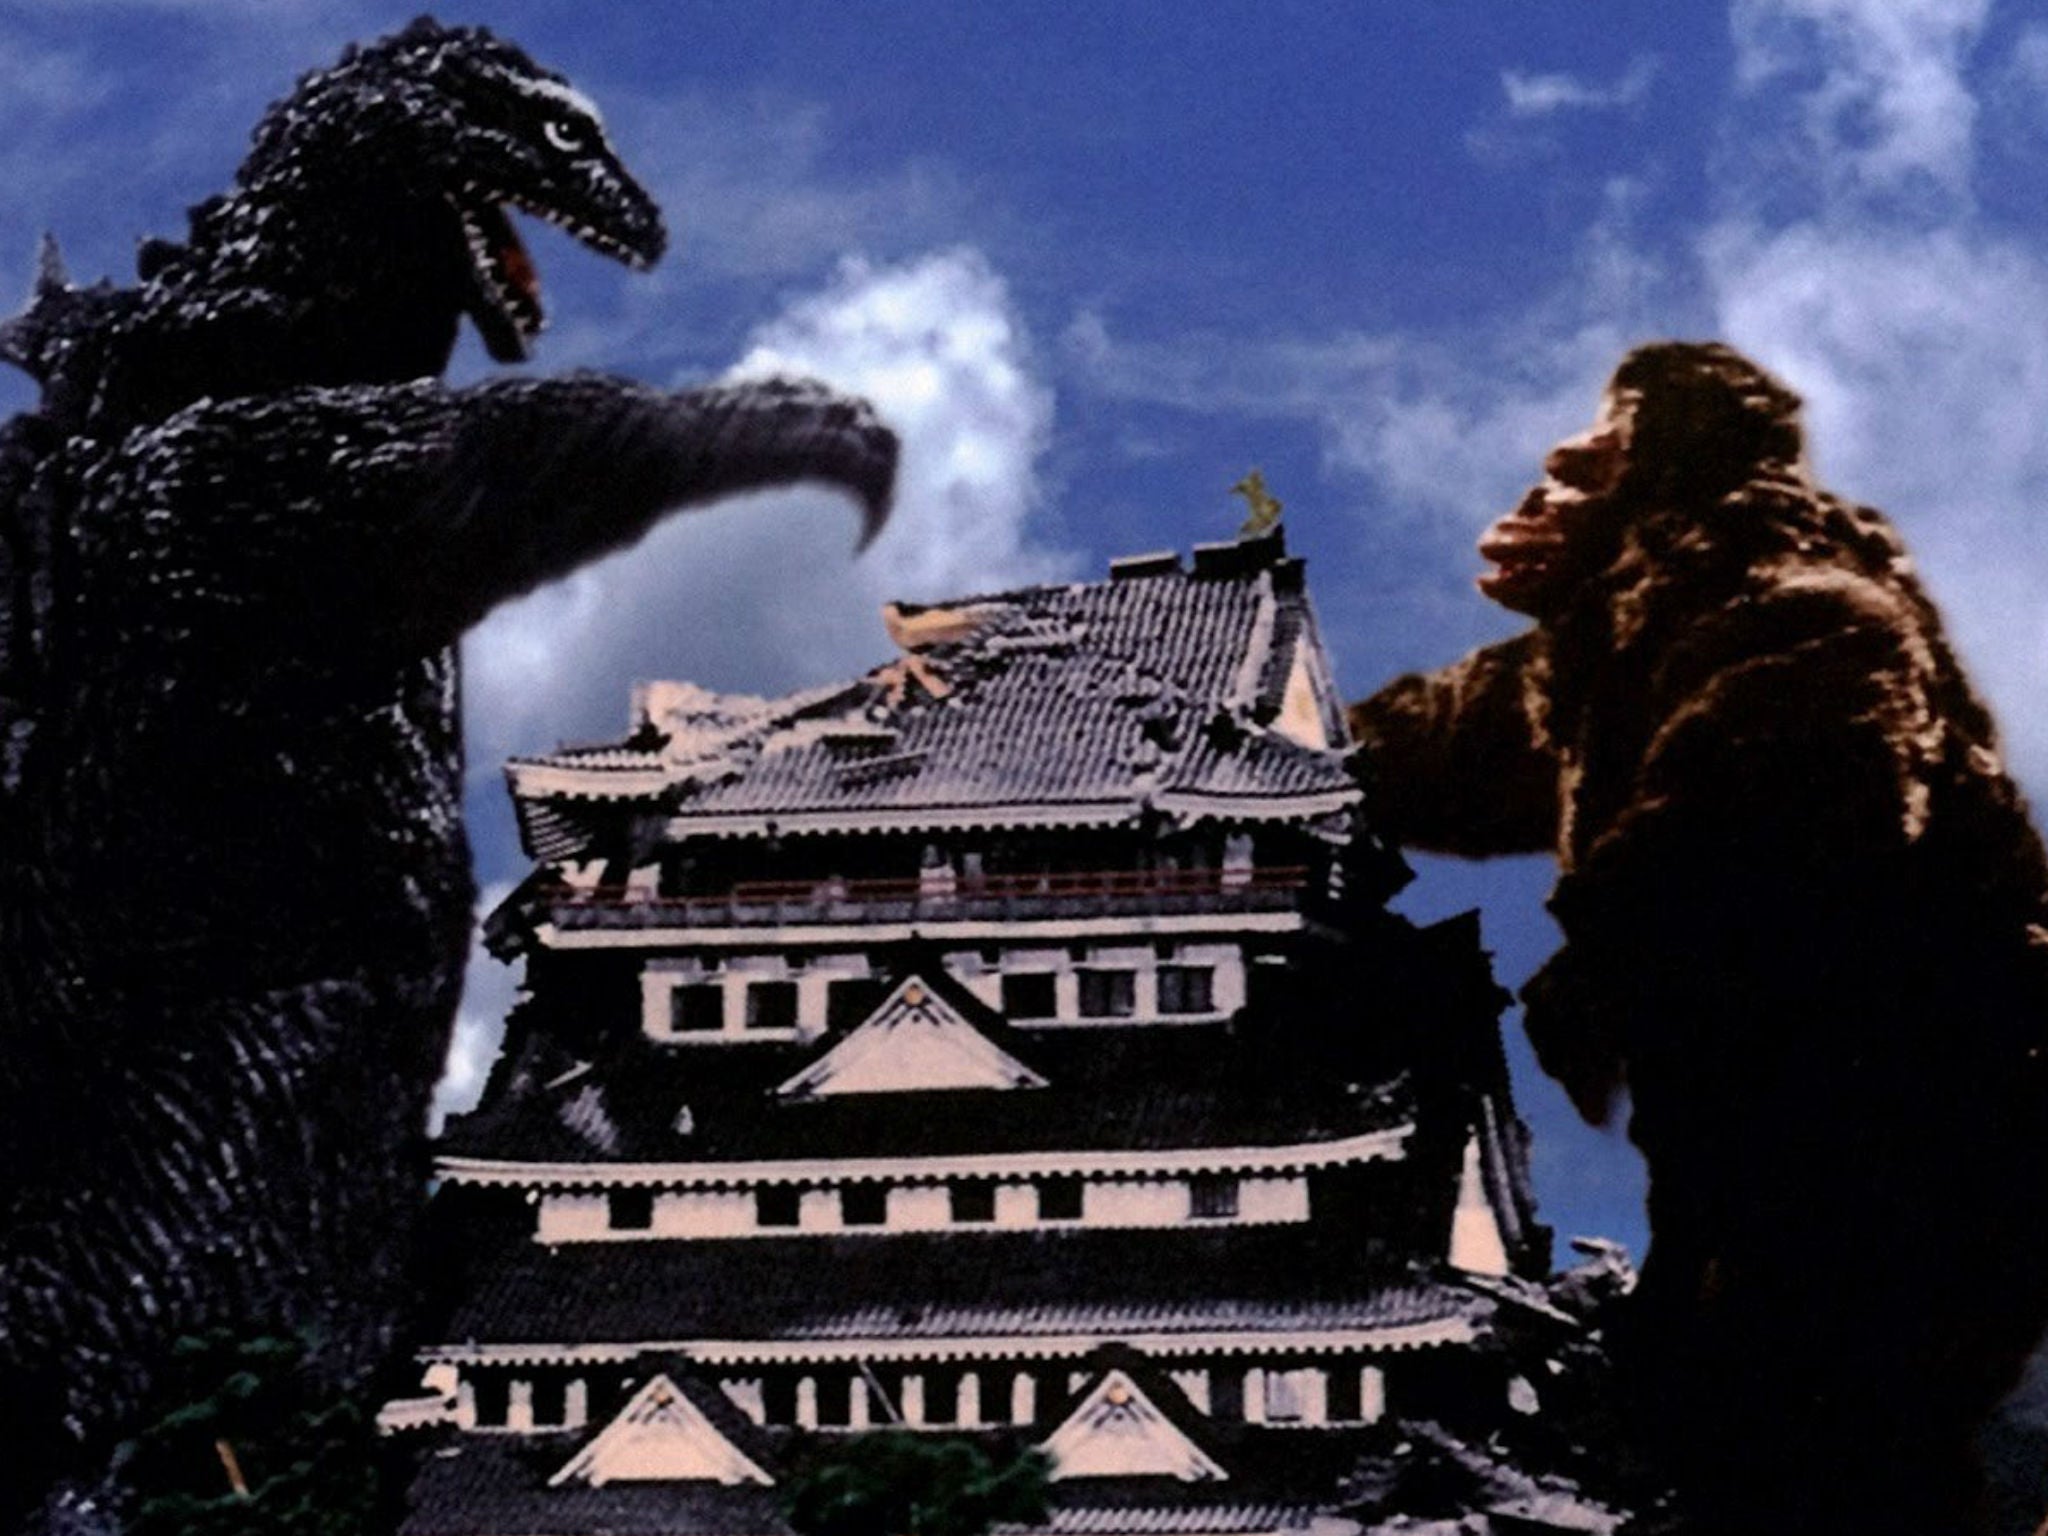 Godzilla and King Kong have met before in a 1962 Japanese sci-fi film